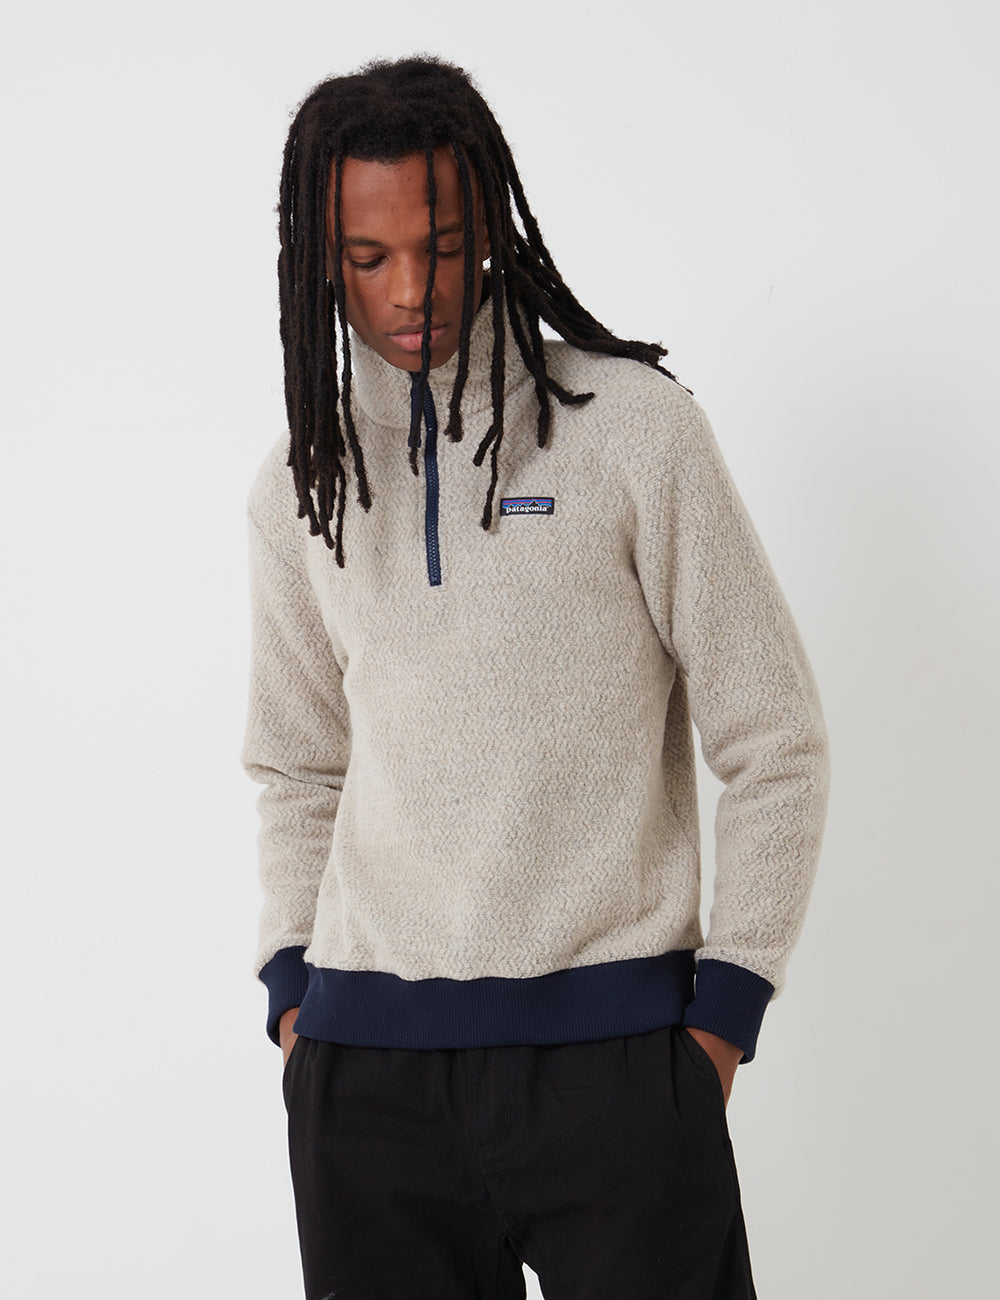 Patagonia Woolyester Fleece P/O - Oatmeal Heather I URBAN EXCESS.